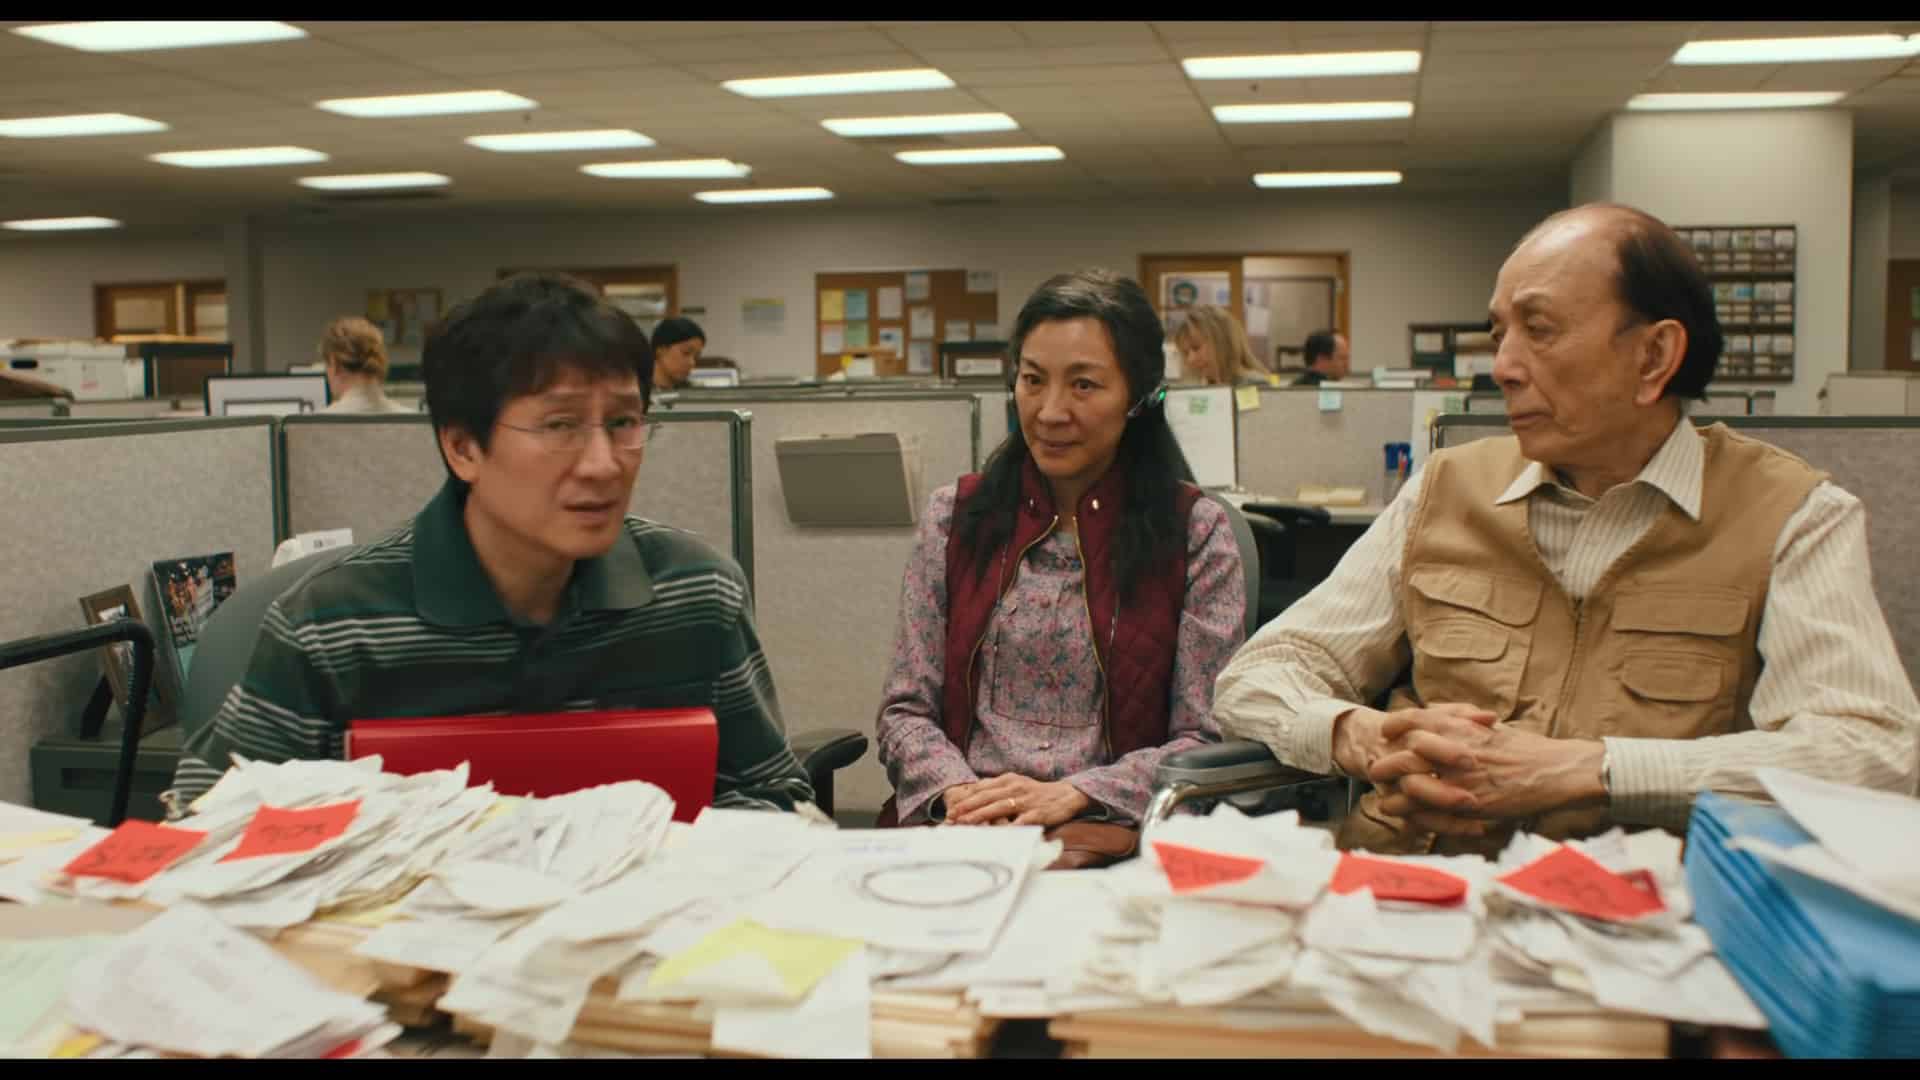 Waymond (Ke Huy Quan), Evelyn (Michelle Yeoh) and Gong Gong (James Hong) meeting with the IRS